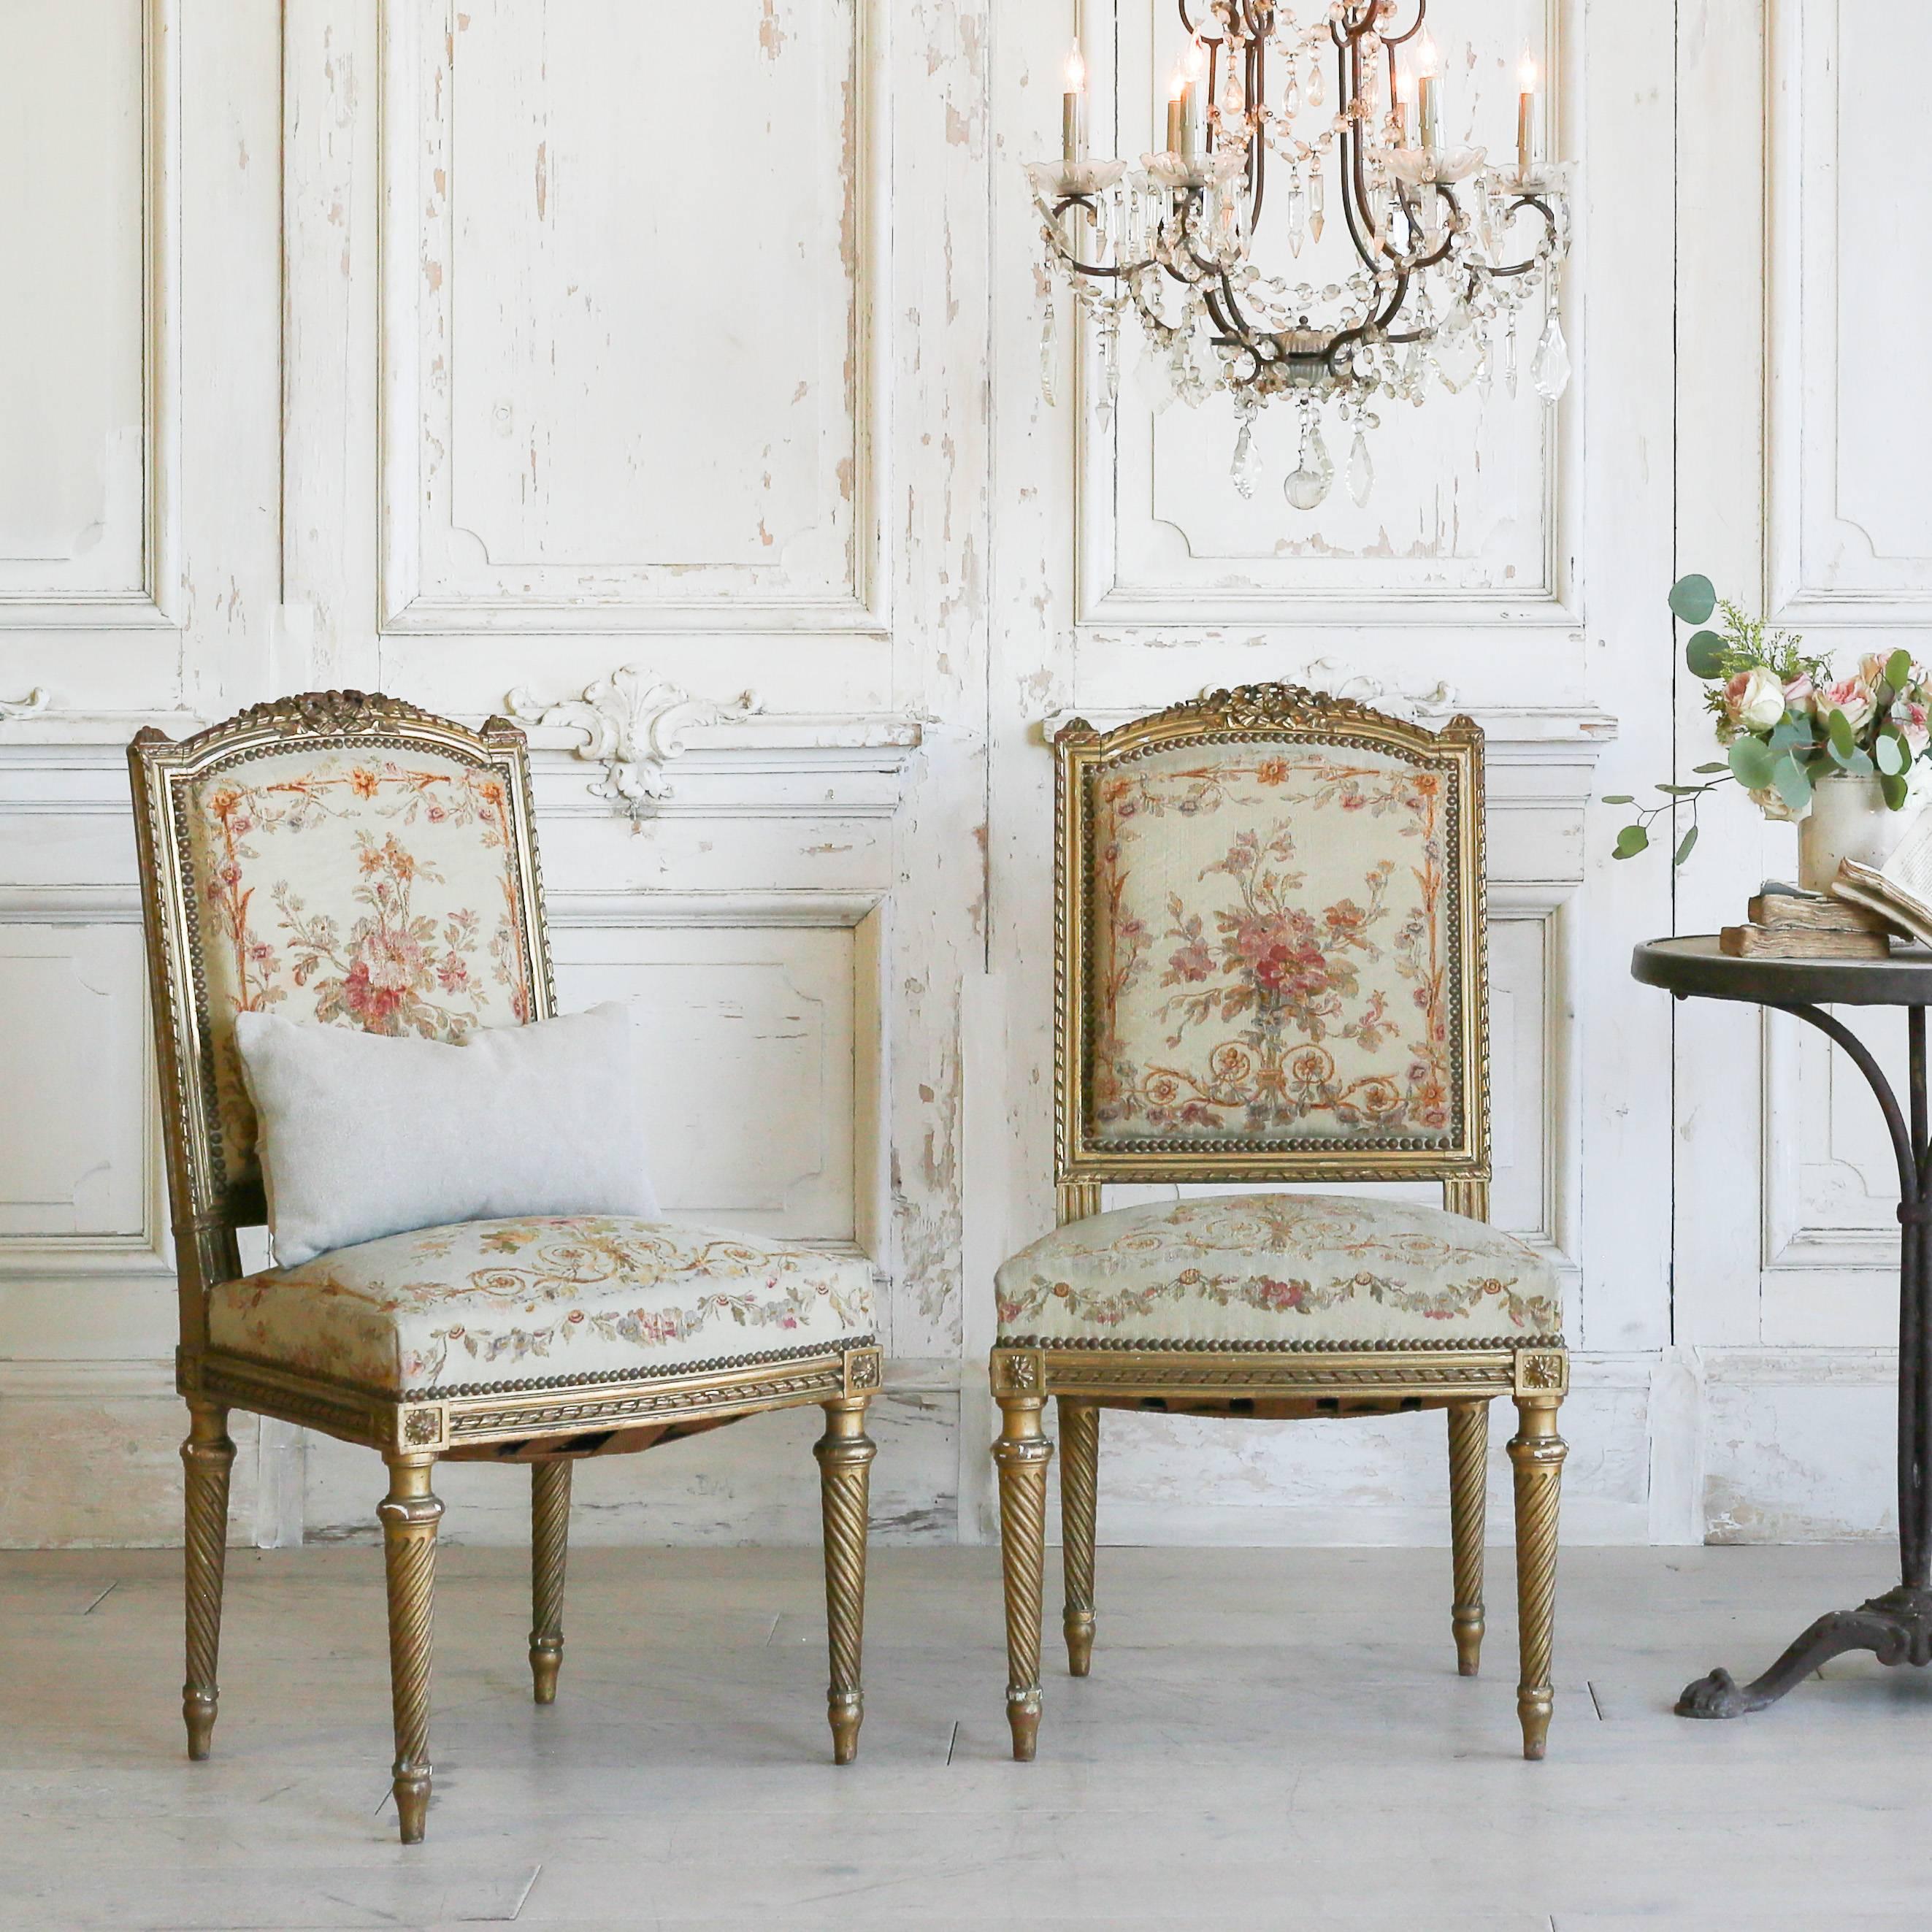 Lovely pair of Louis XVI side chairs in gilt. These chairs have original fabric securely tacked with beautifully turned legs. A delicately carved crest and shallow finials decorate the back rest. A beautiful addition to a cafe table or sitting area.